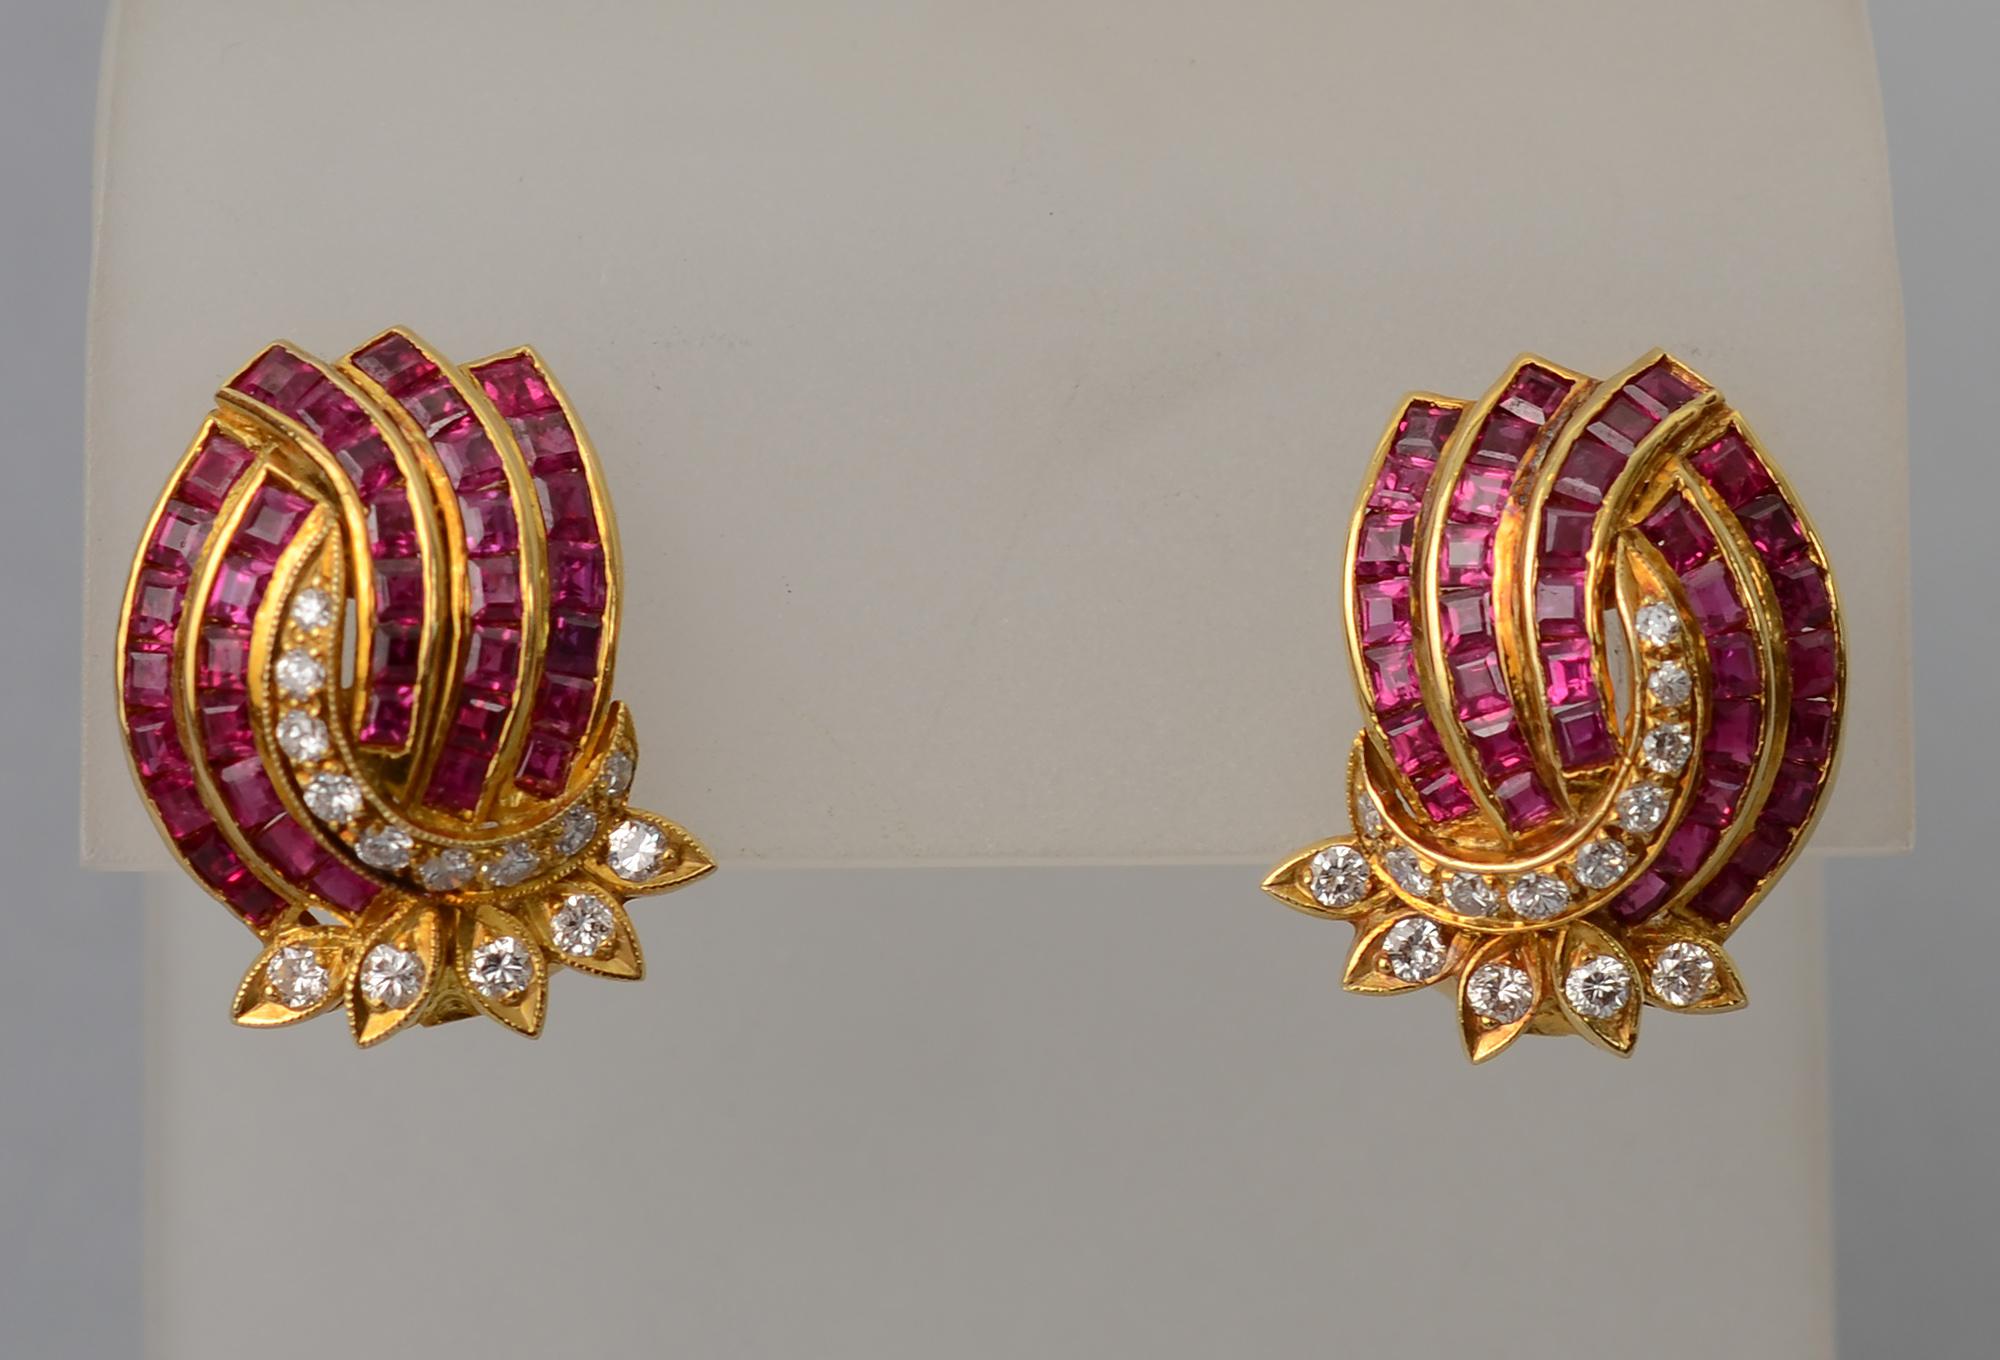 Delicate and graceful ruby and diamond earrings set in 18 karat gold. 
Round diamonds and square cut rubies combine beautifully together. Backs are clips and collapsible posts. 